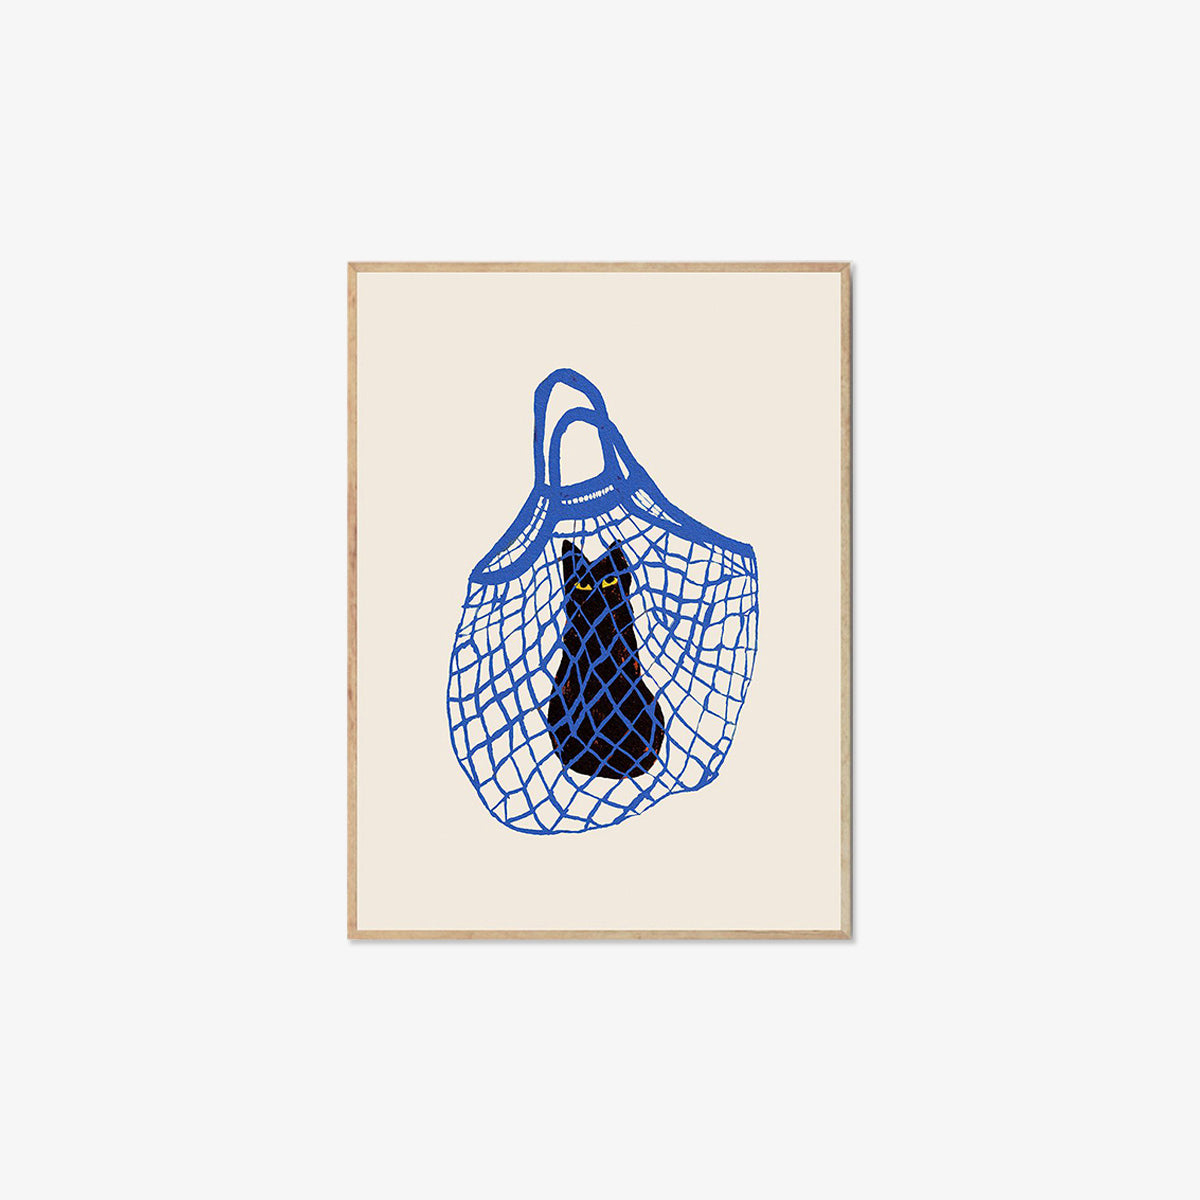 KORT A5 // THE CAT'S IN THE BAG